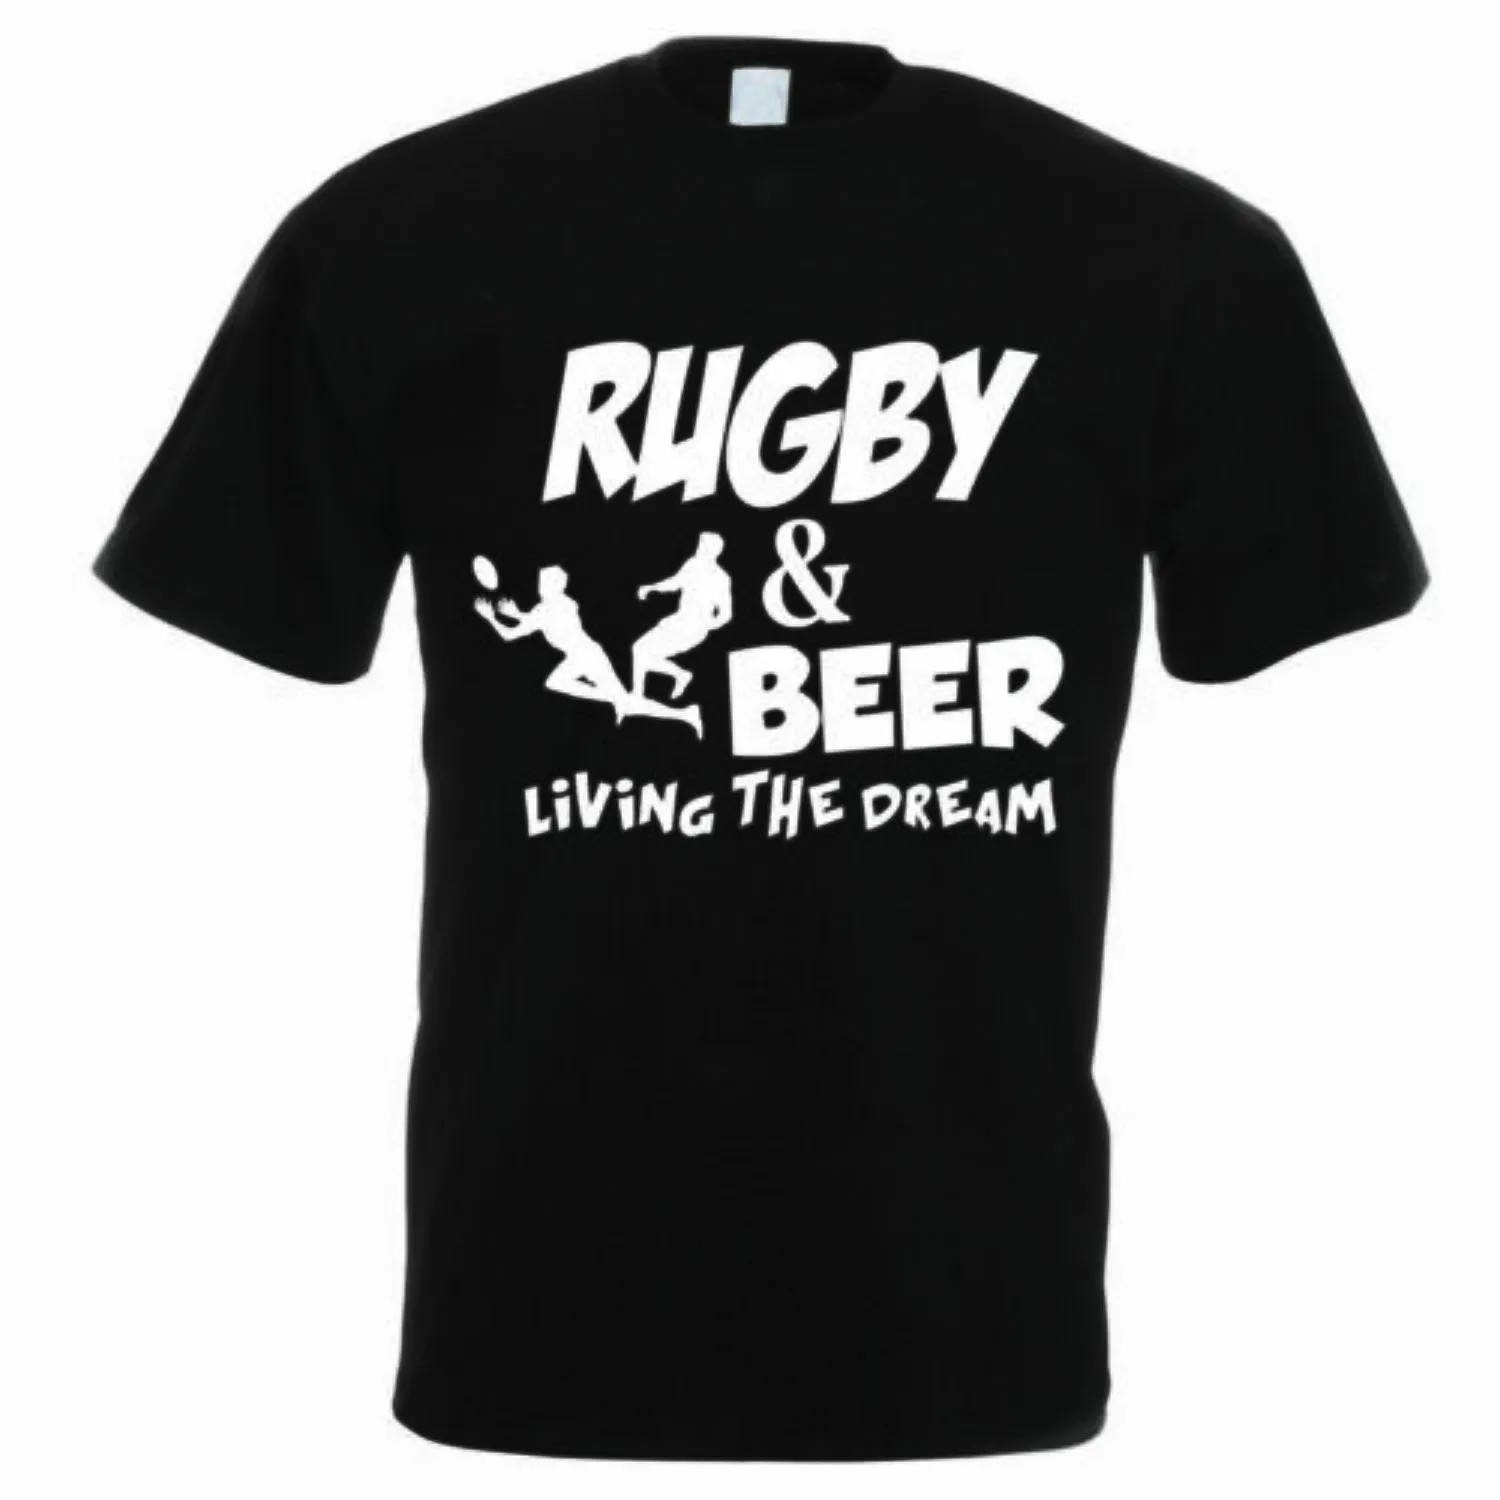 Cartoon Rugby Shirts Rugby Gifts Men Funny Rugby Tshirt Rugby Tshirt Gifts - Funny